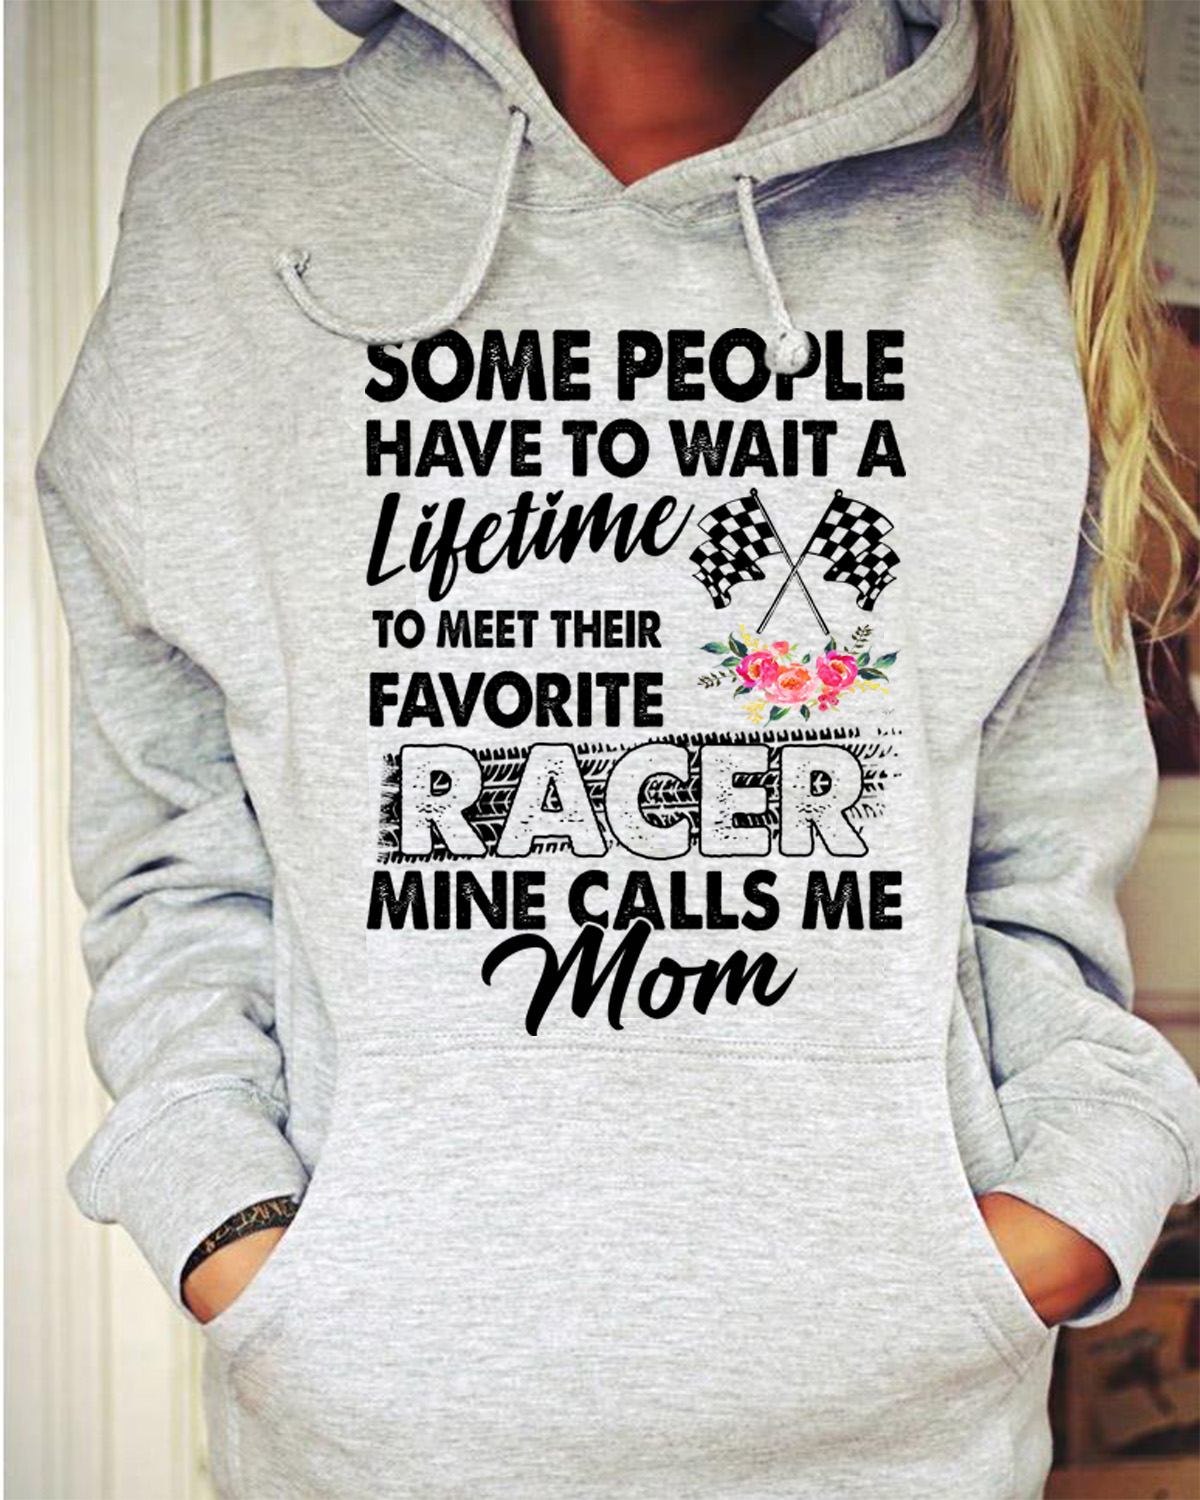 Some people have to wait a lifetime to meet their favorite racer mine calls me mom